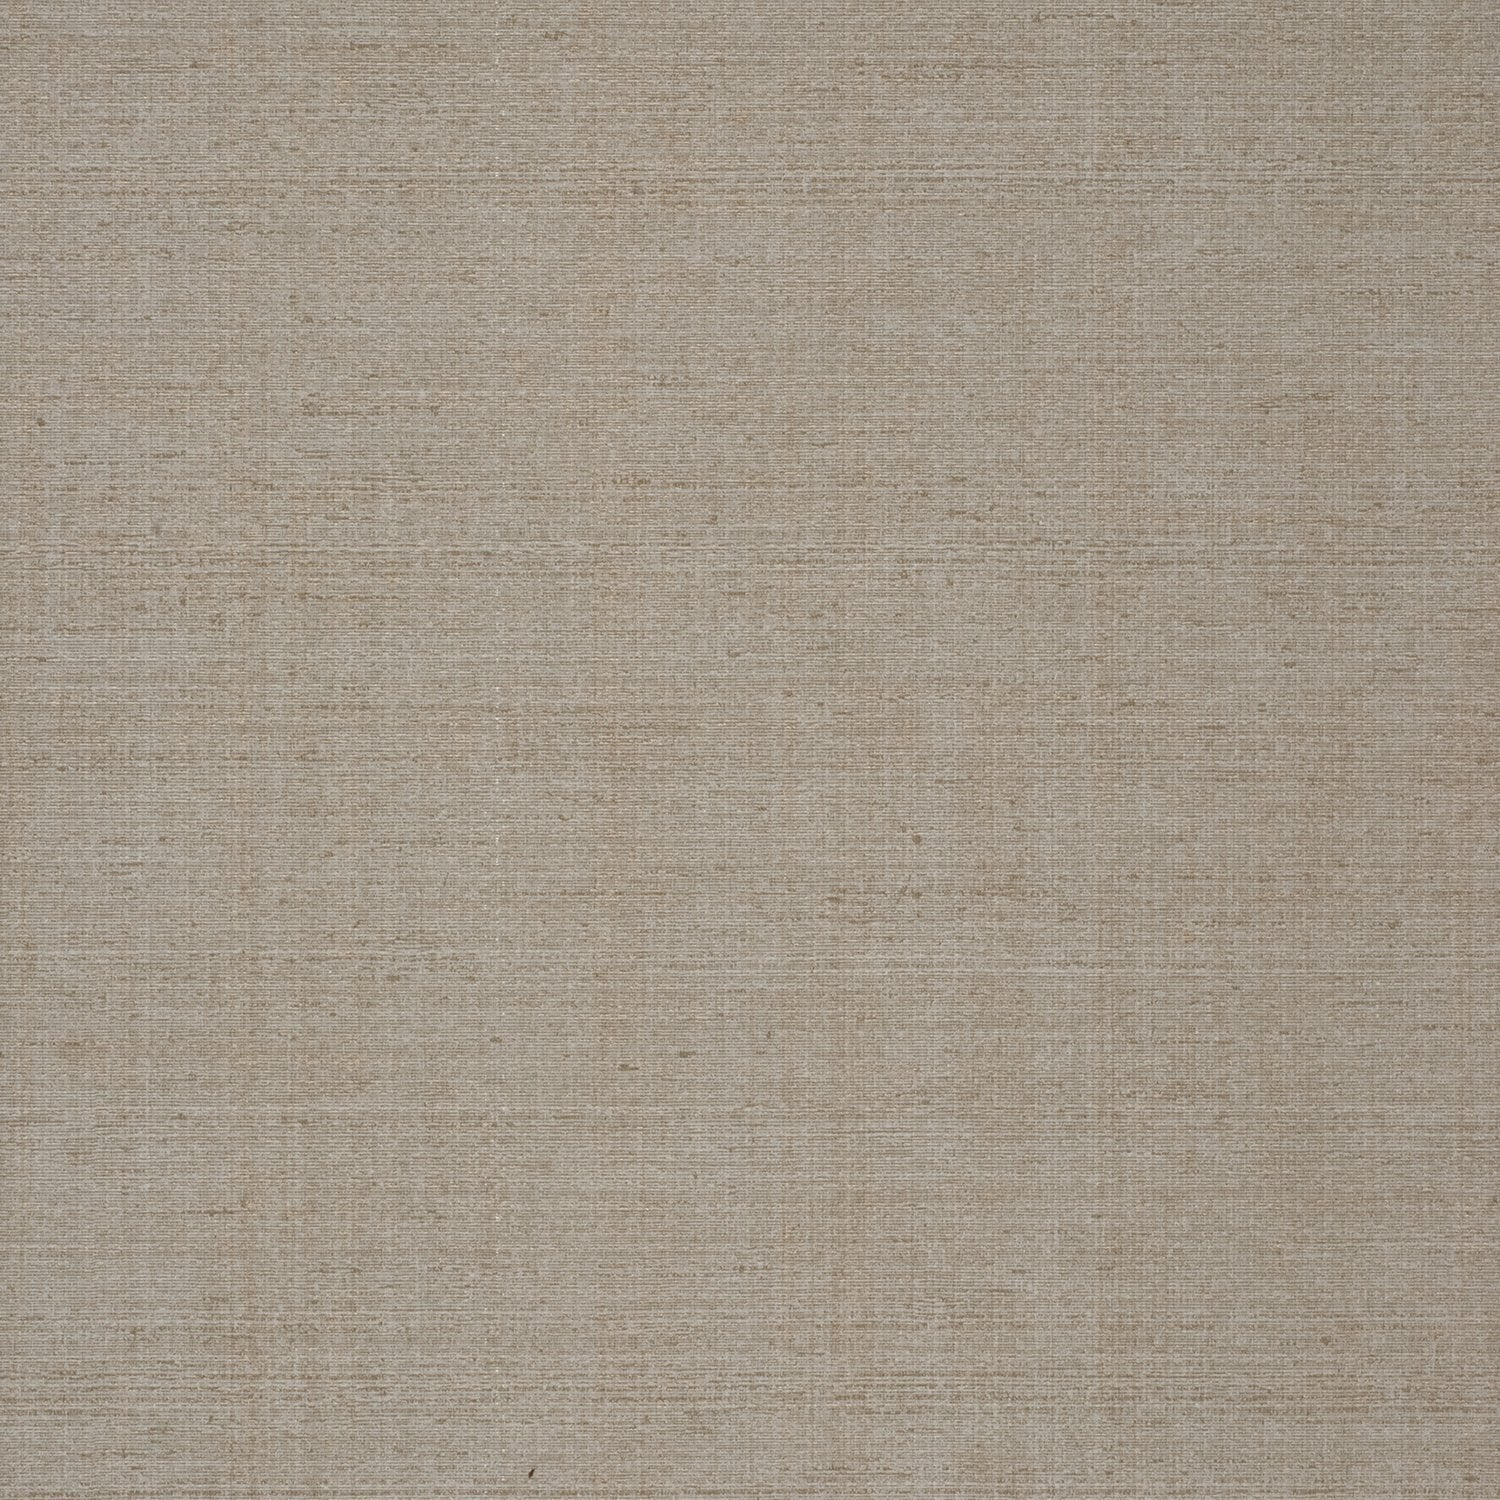 Oasis - Y44932 - Wallcovering - Vycon - Kube Contract